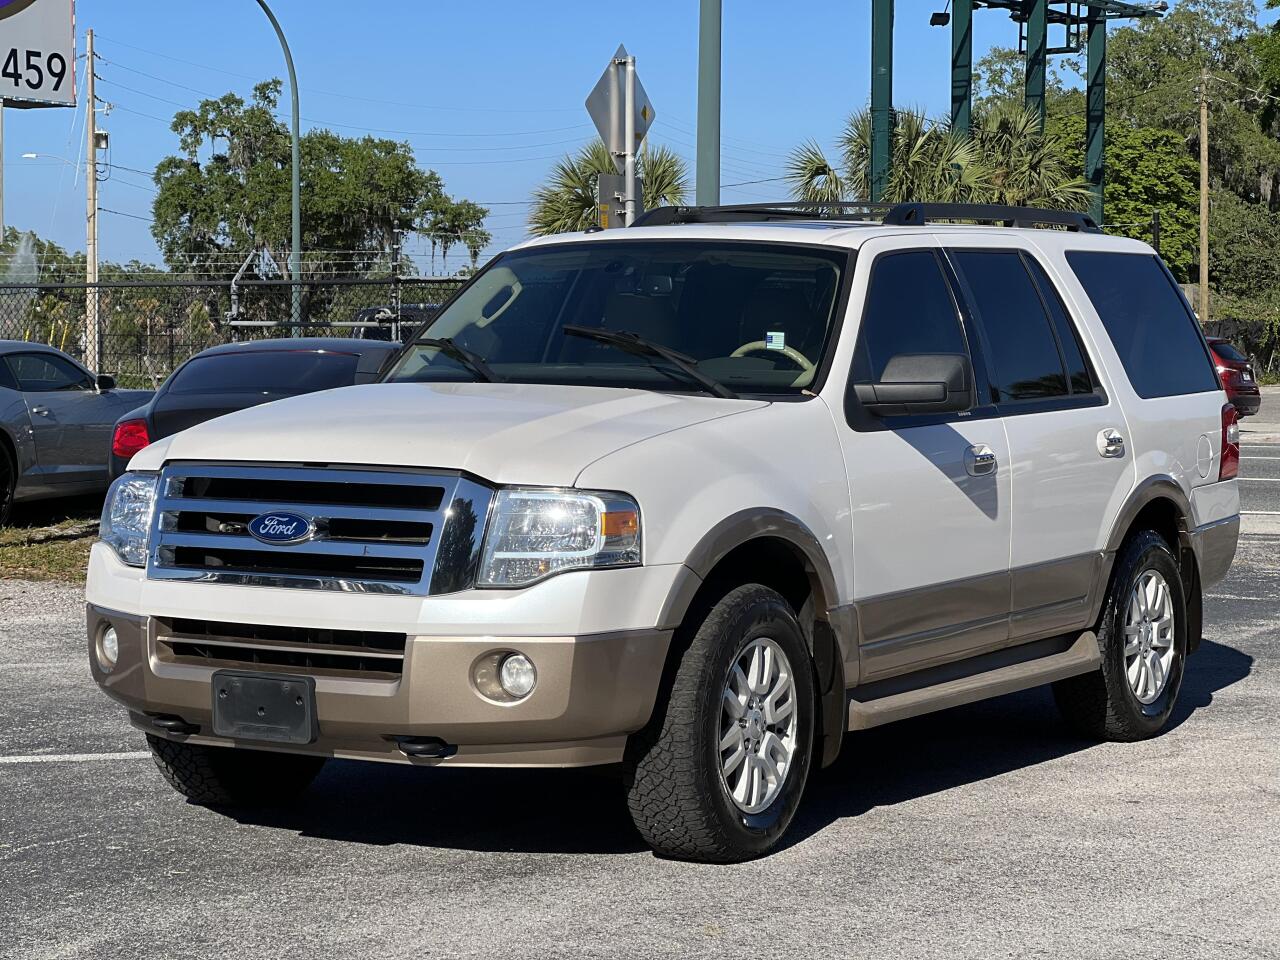 2012 Ford Expedition For Sale In Florida - Carsforsale.com®